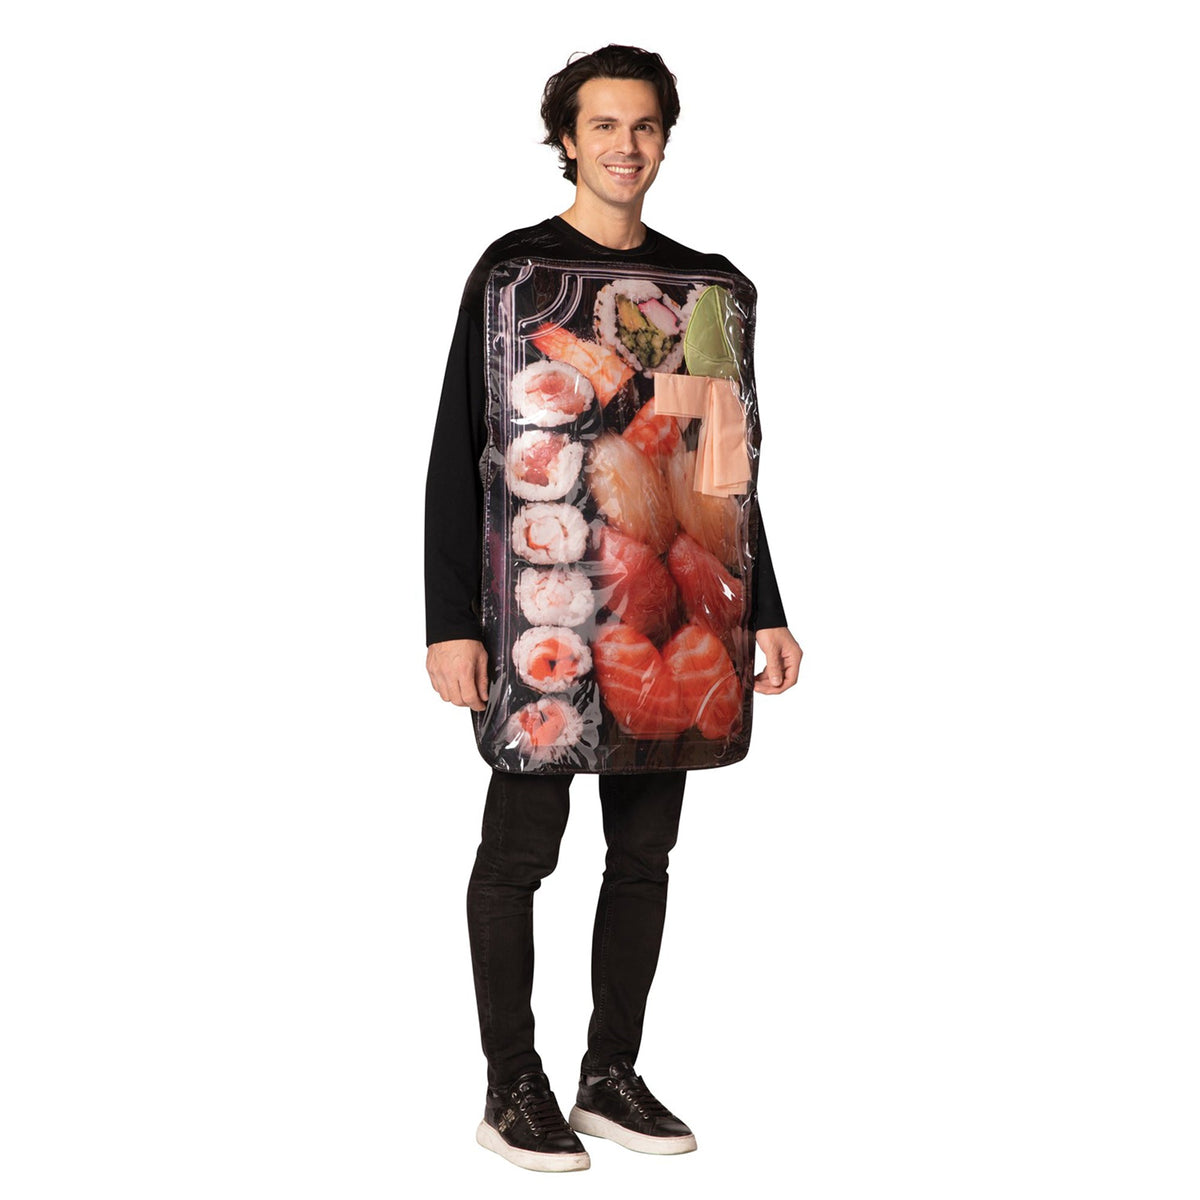 RASTA IMPOSTA PRODUCTS Costumes Get Real Sushi to Go Food Costume for Adults 791249122904